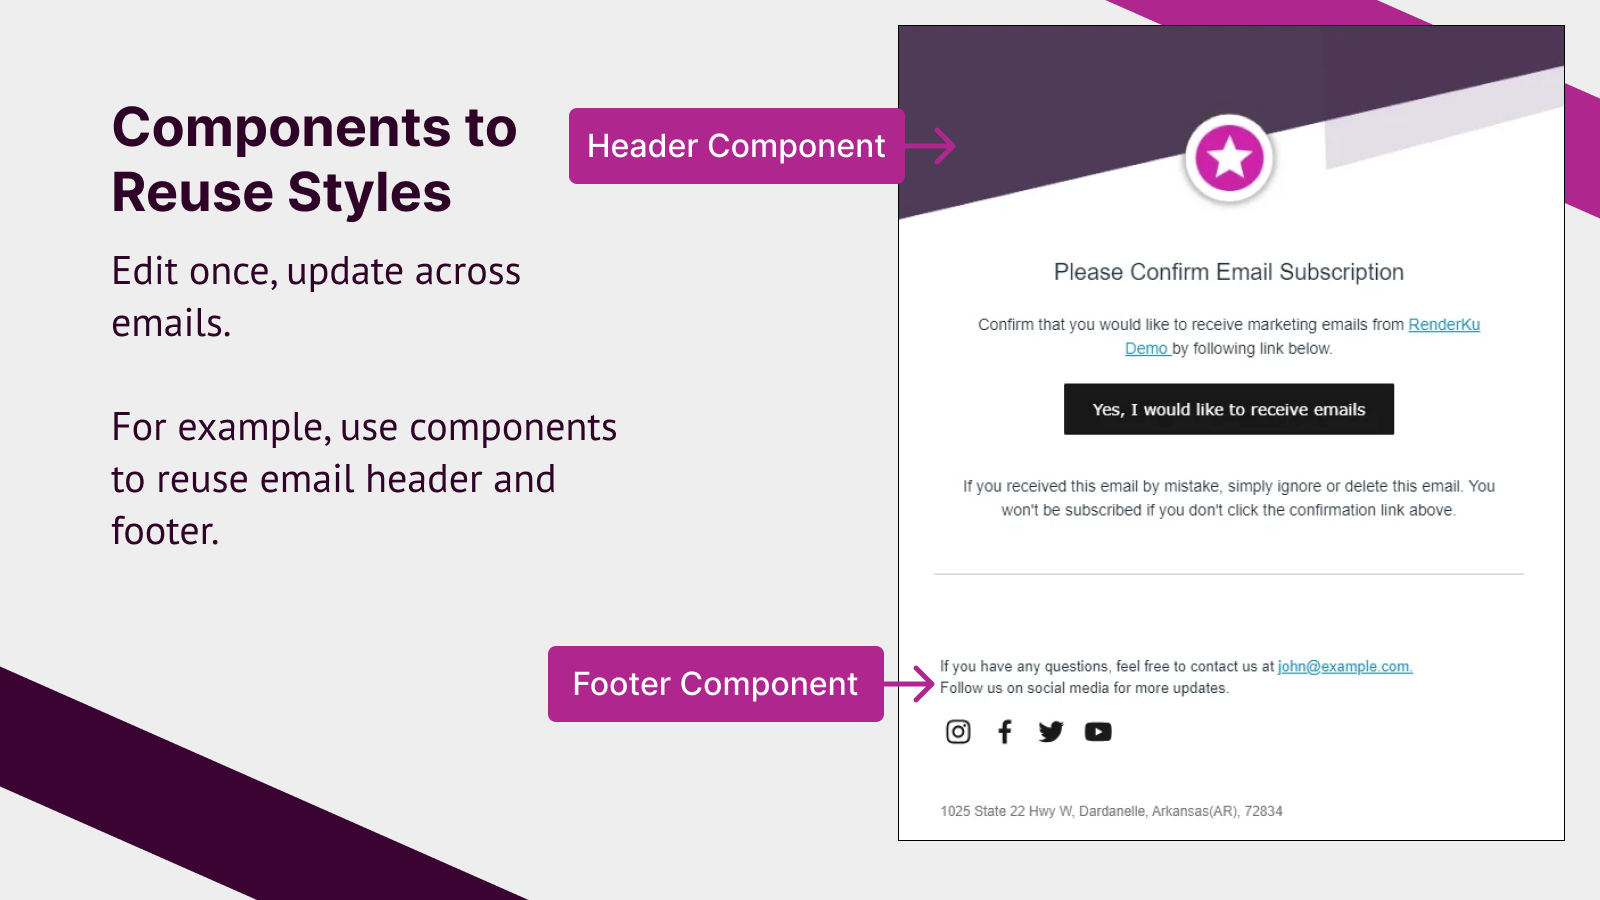 Components to Reuse Styles